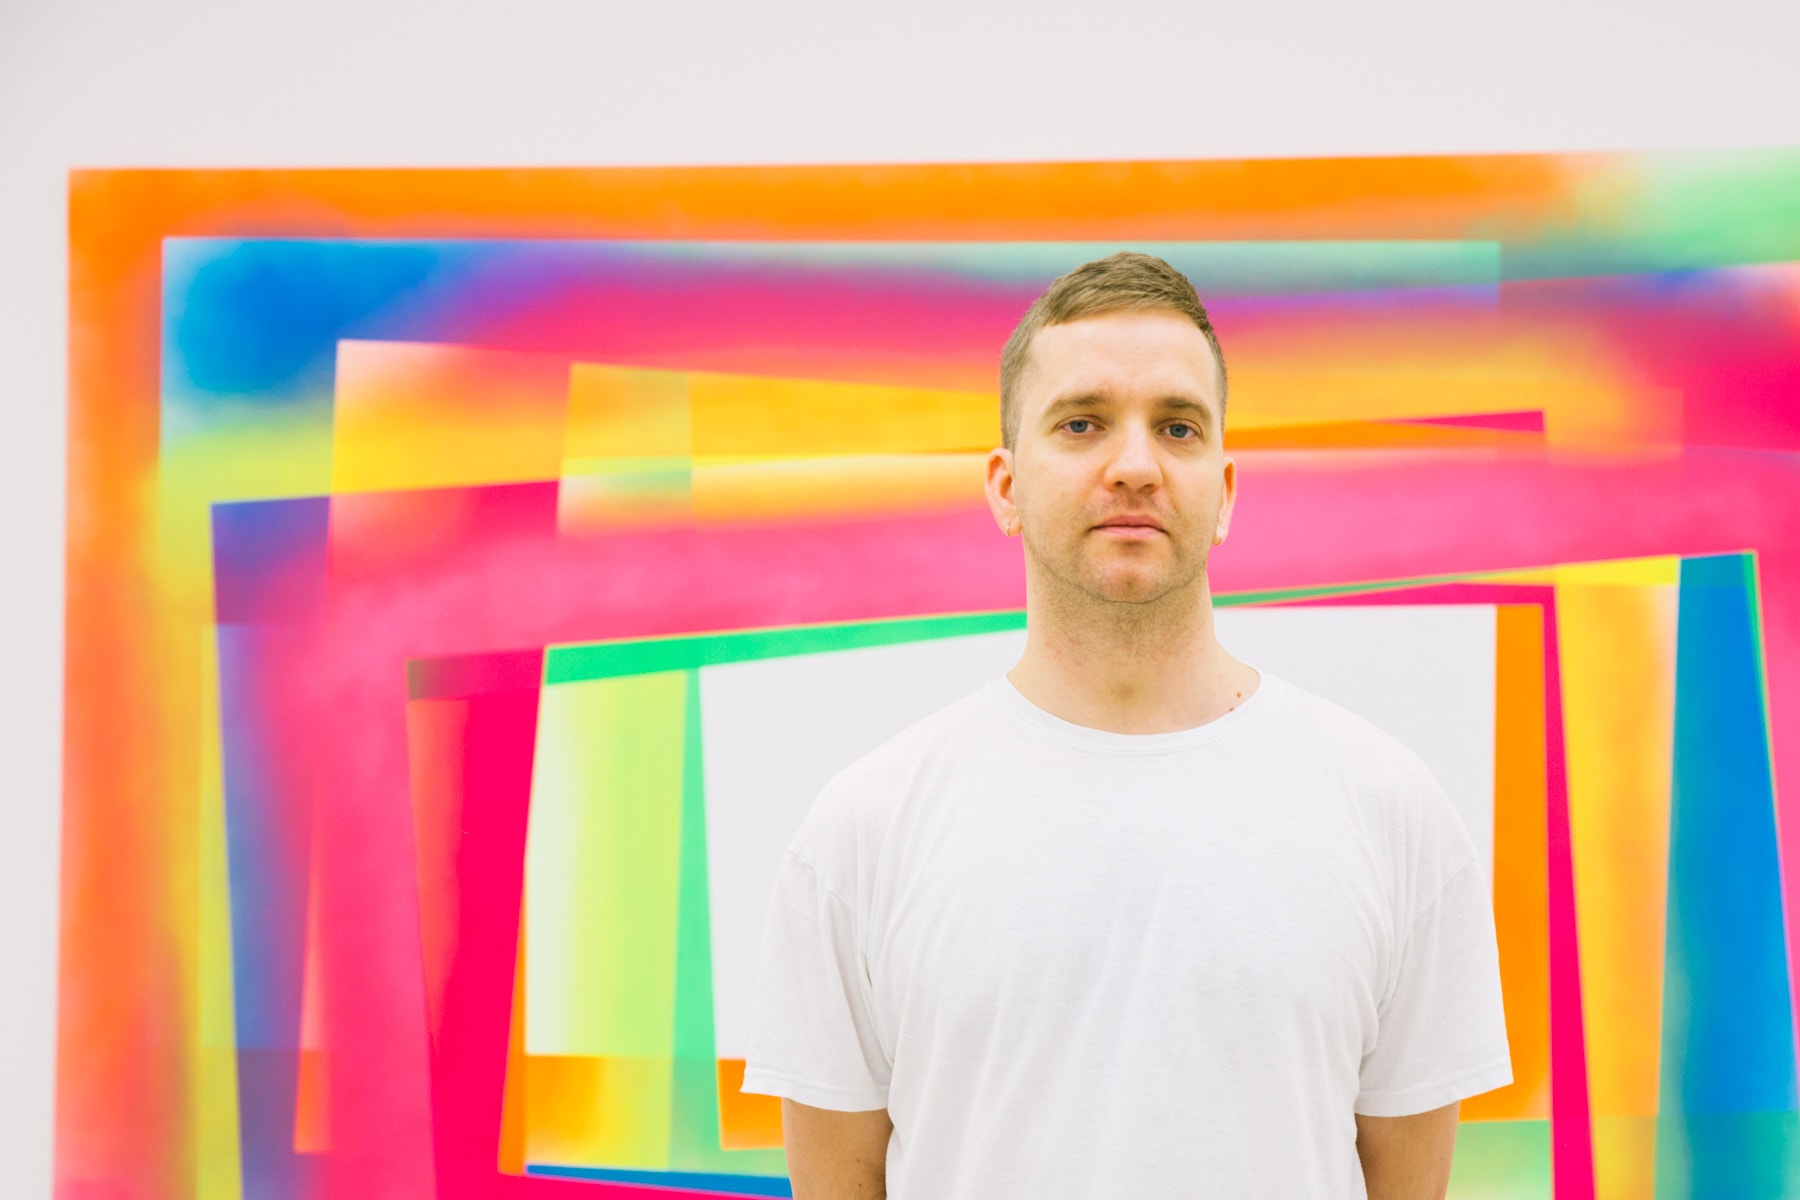 Eddie Peake on Working With Kendrick Lamar and Breaking Down Barriers Where You Belong Exhibition 2016 White Cube Hong Kong Central Artist Paintings Sculpture Videos Music Interviews